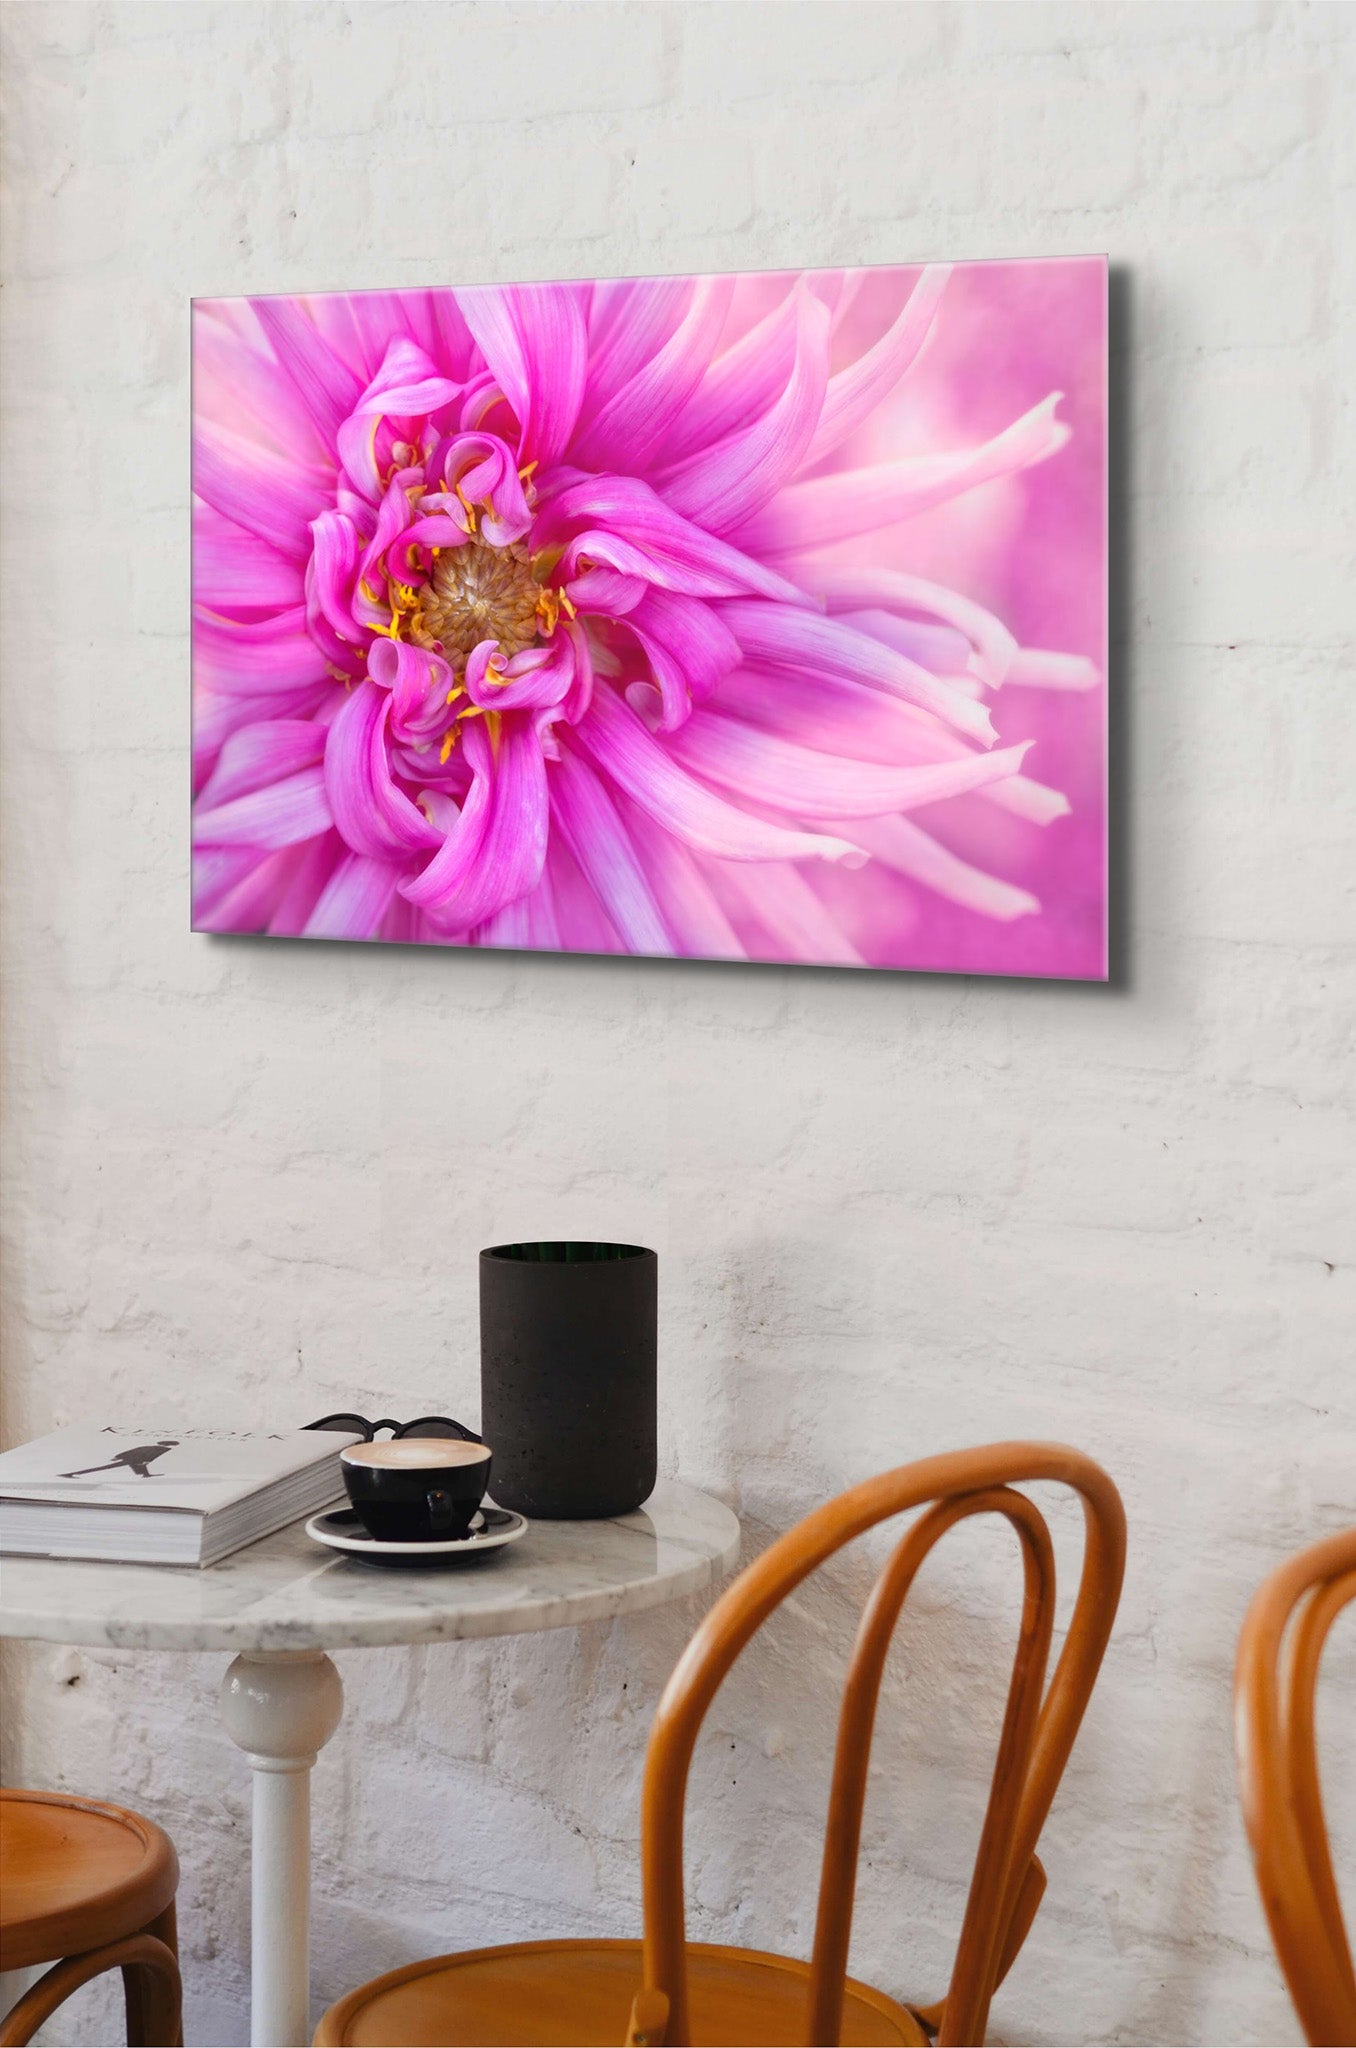 Photograph hanging on the wall of a coffee shop. Hanging over a table and chairs. The photograph is a vibrant macro photo of a pink dahlia by Cameron Dreaux. Printed on high-quality metal. 